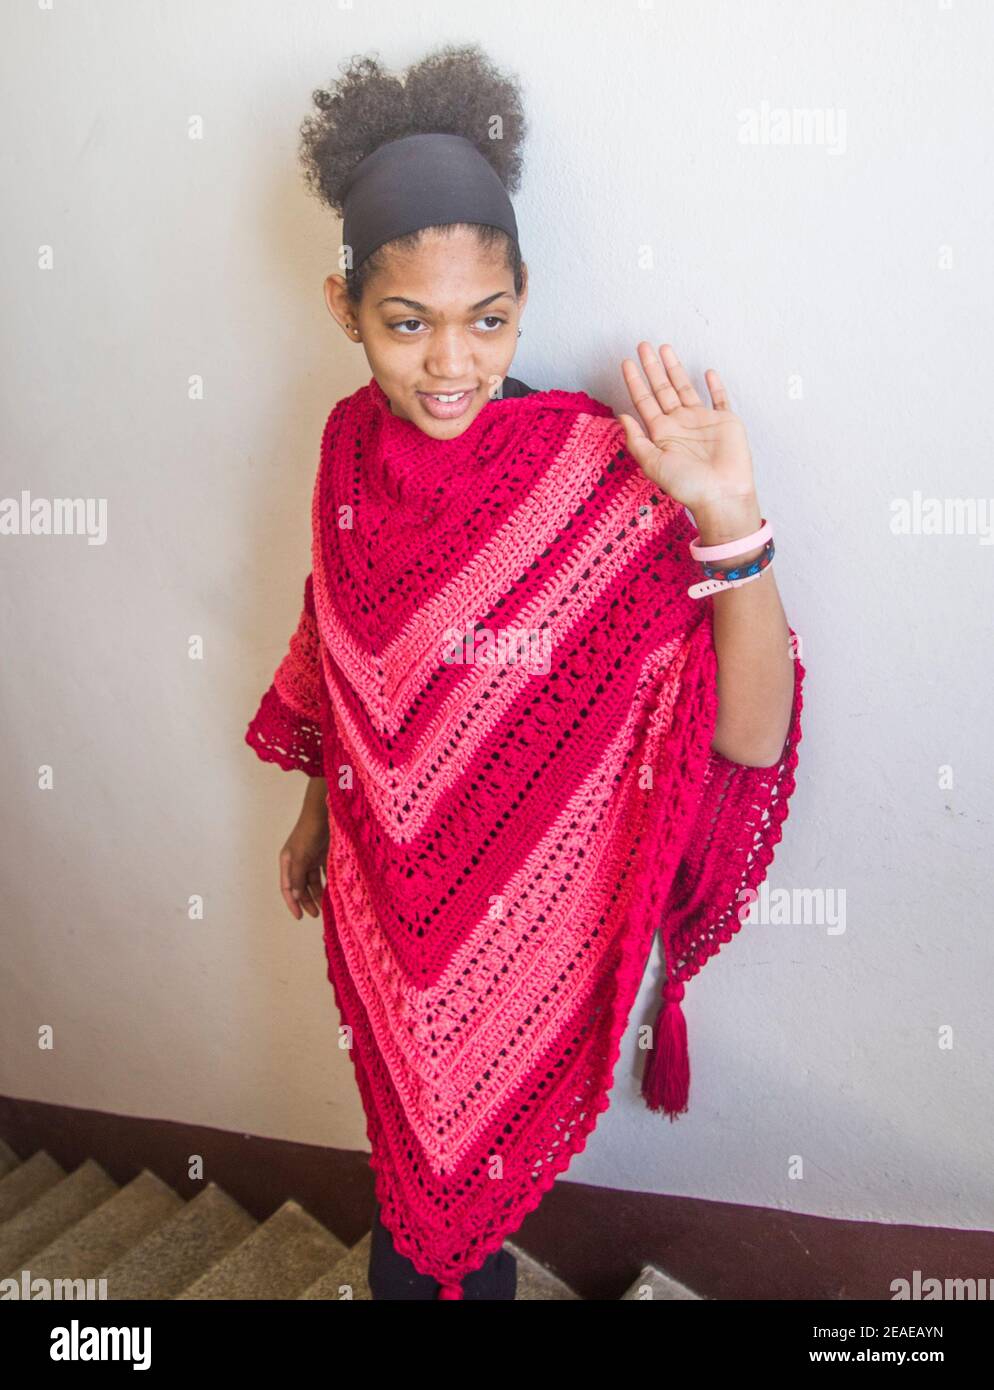 Elegant red and pink poncho or shawl tied by a young smiling and happy  Brazilian model Stock Photo - Alamy